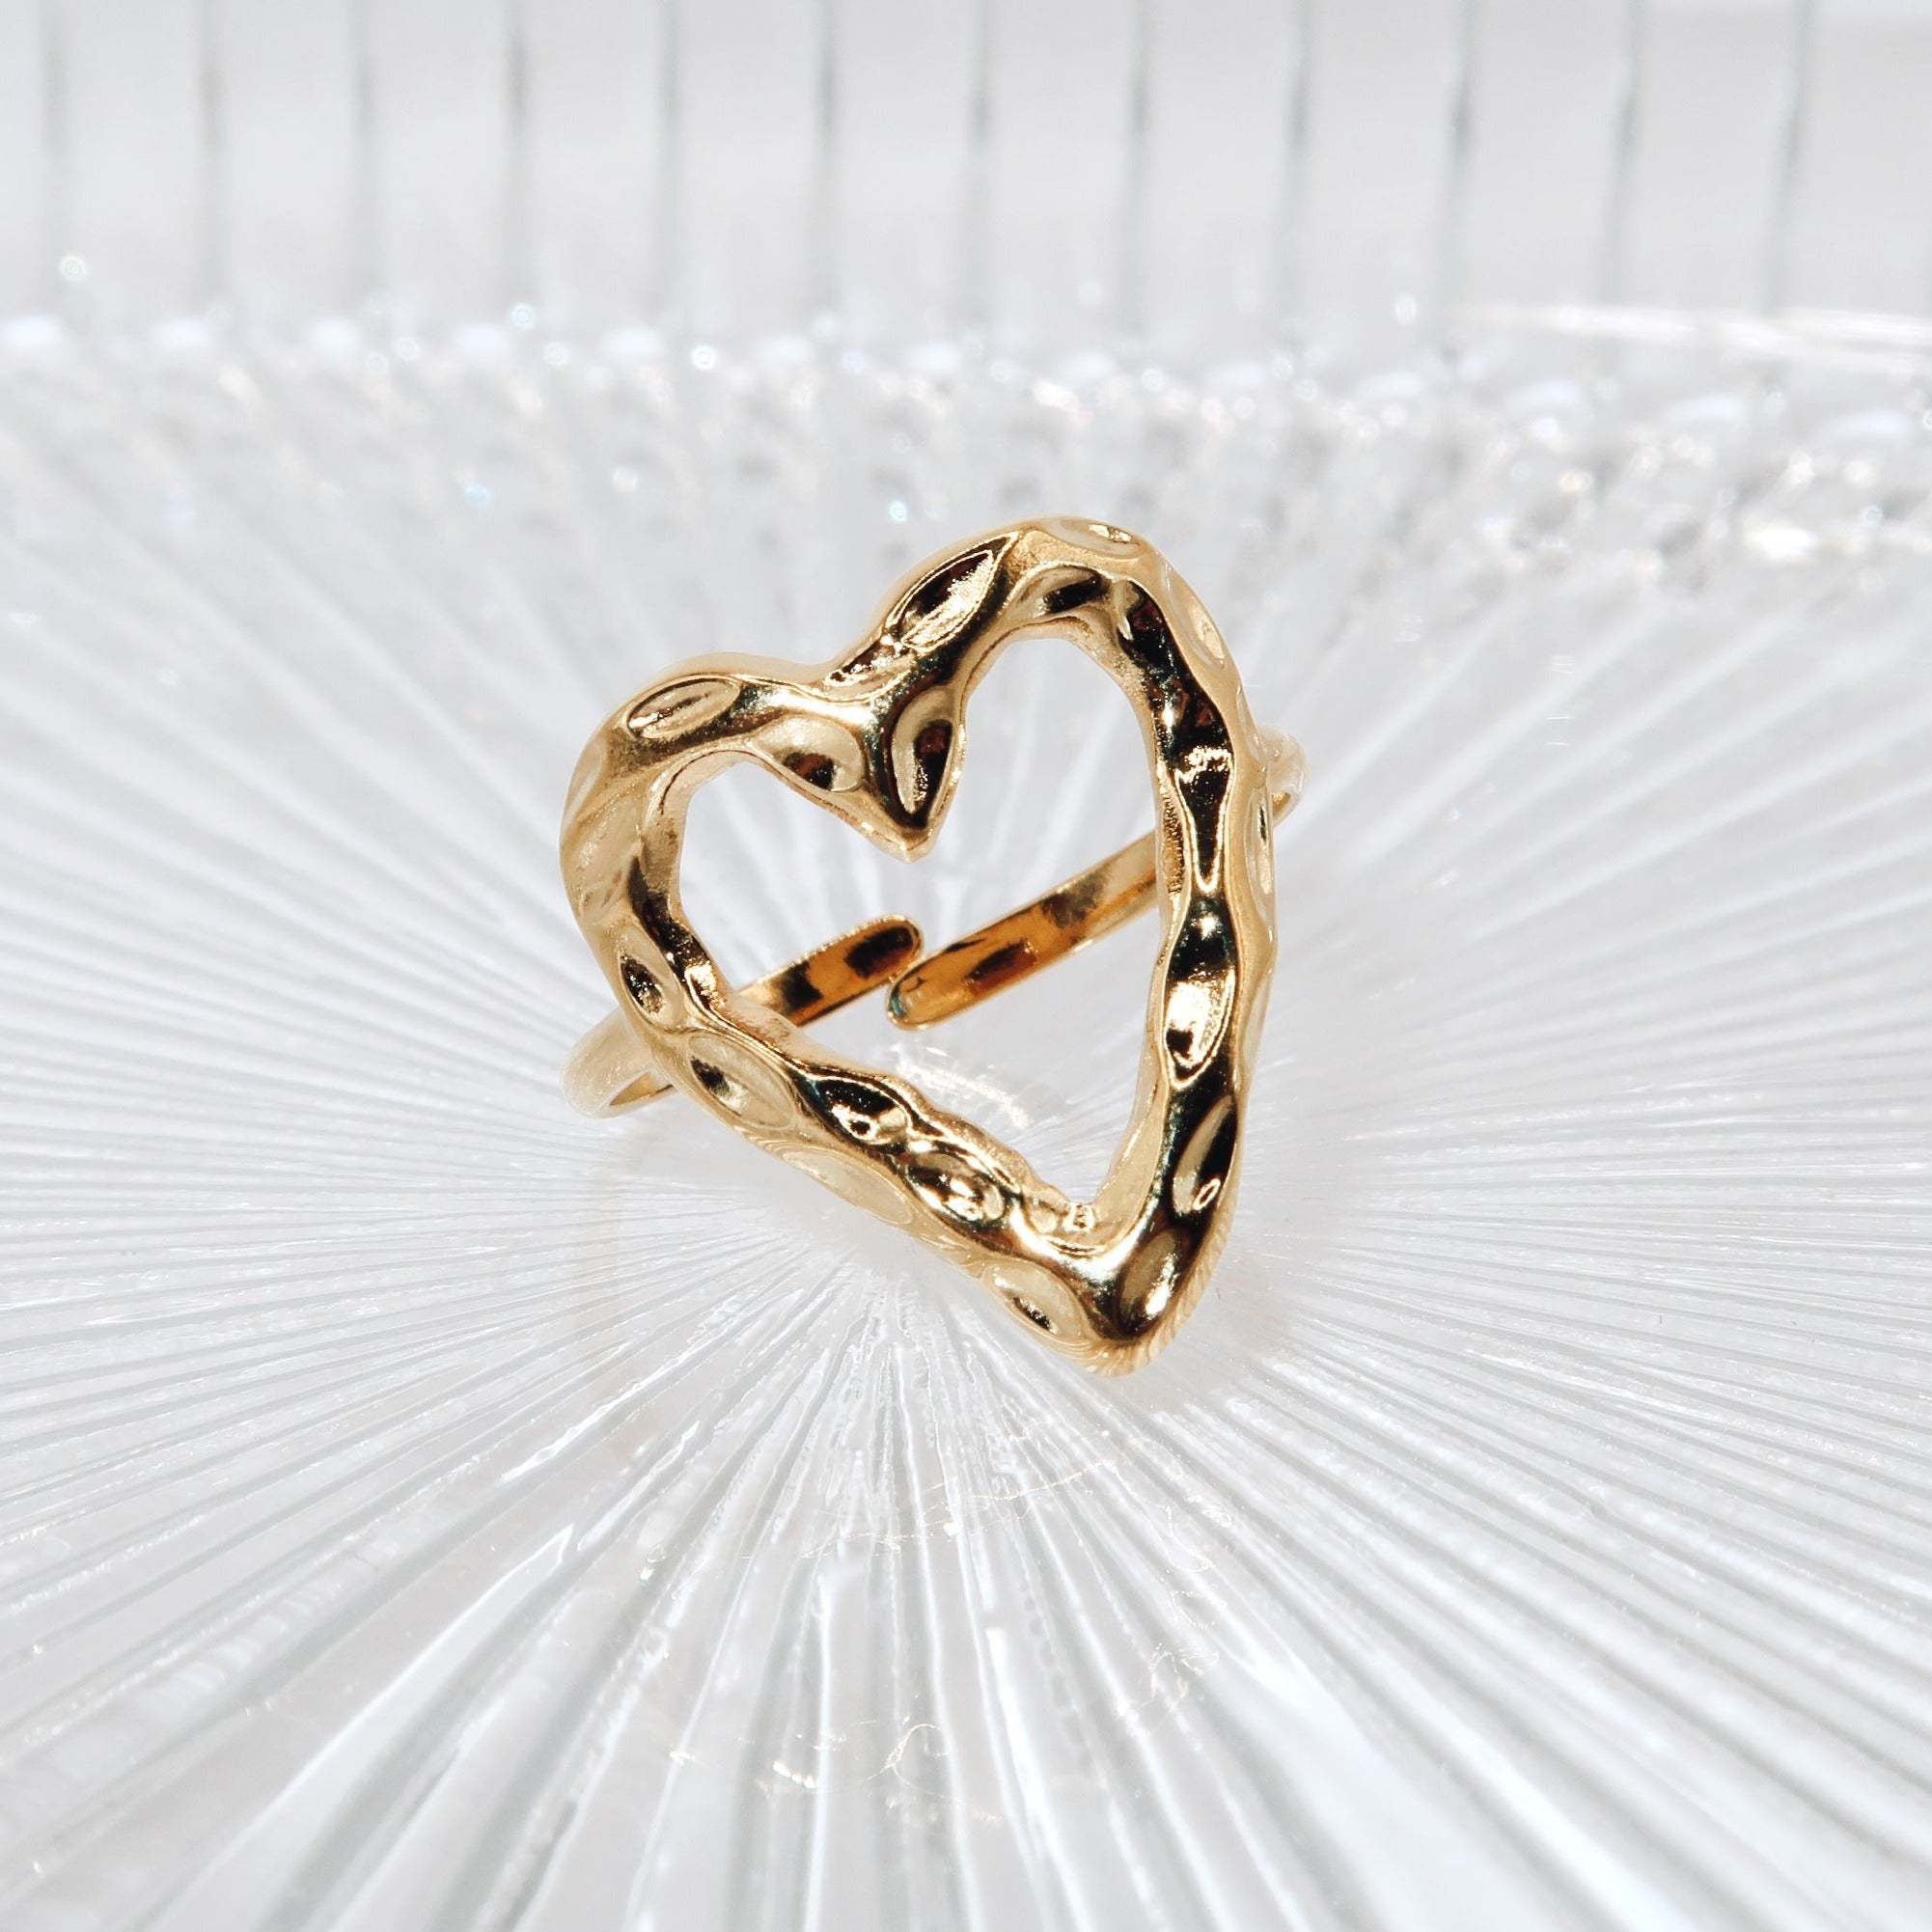 ALANA - 18K PVD Gold Plated Hollow Heart Shaped Ring - Mixed Metals